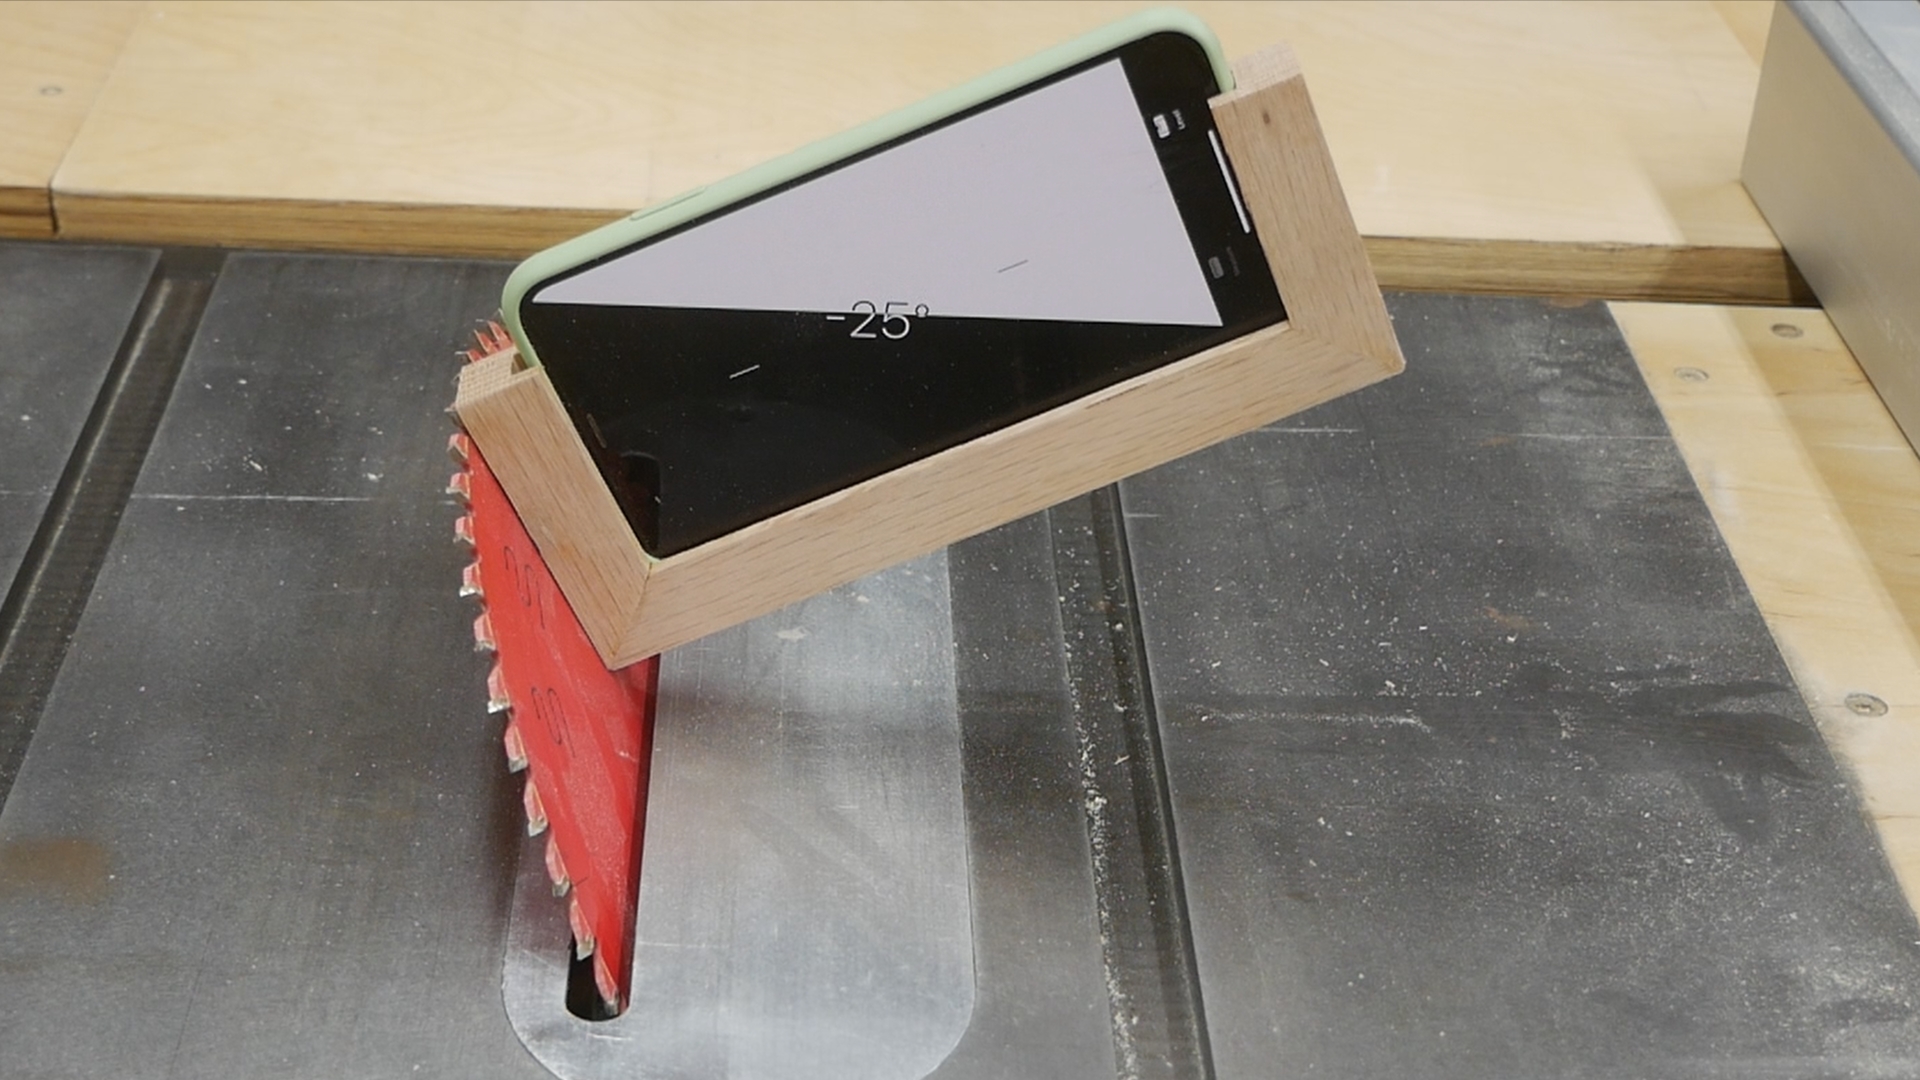 Learn how to transform scrapwood oak with wooden glue into a versatile phone bracket holder doubling as a digital angle finder for woodworking precision.